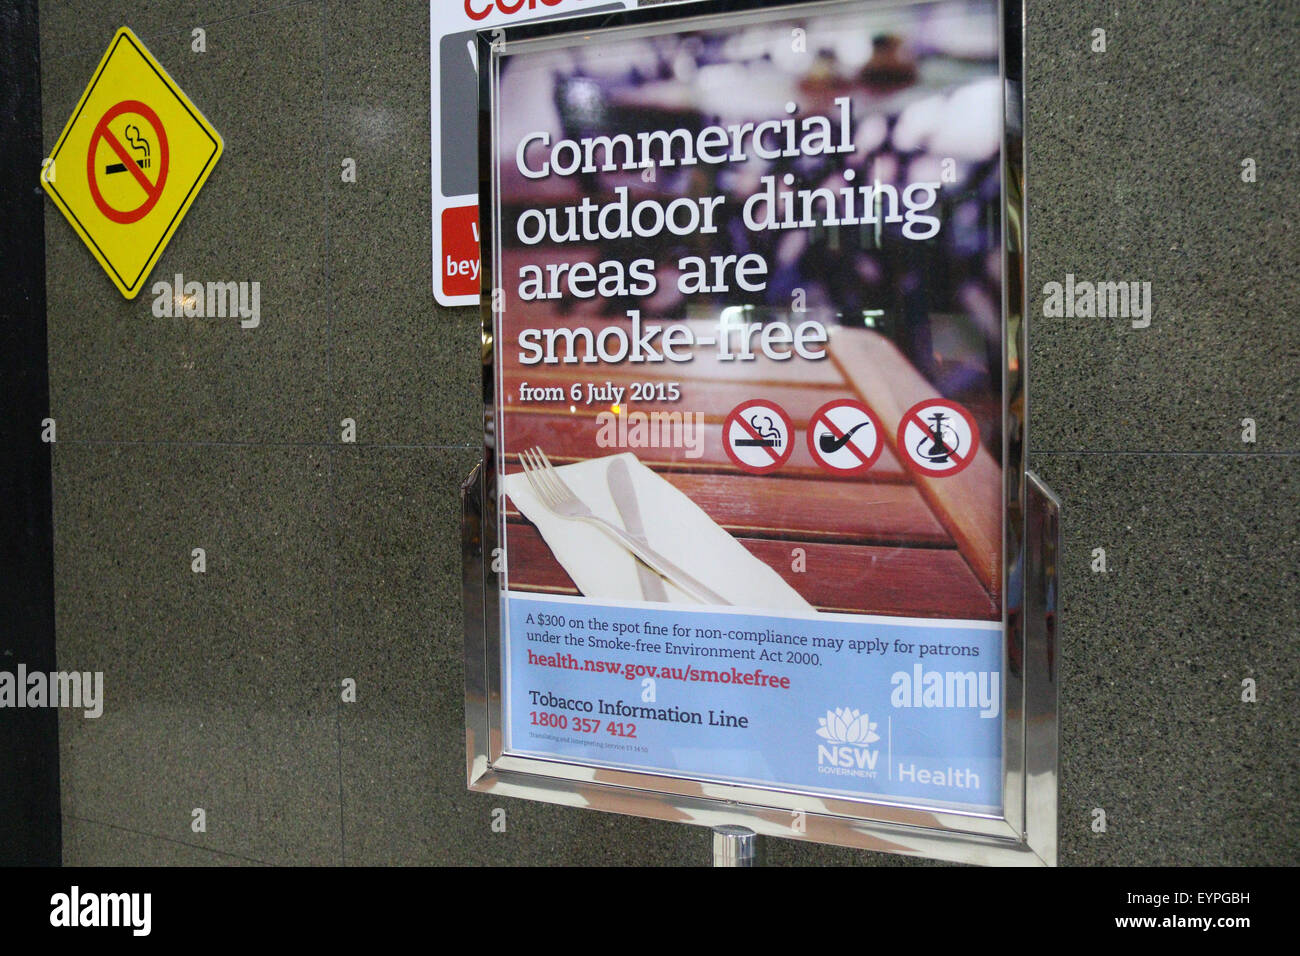 A sign at Broadway Shopping Centre indicating that commercial dining areas are smoke-free from 6 July 2015 in NSW, Australia. Stock Photo